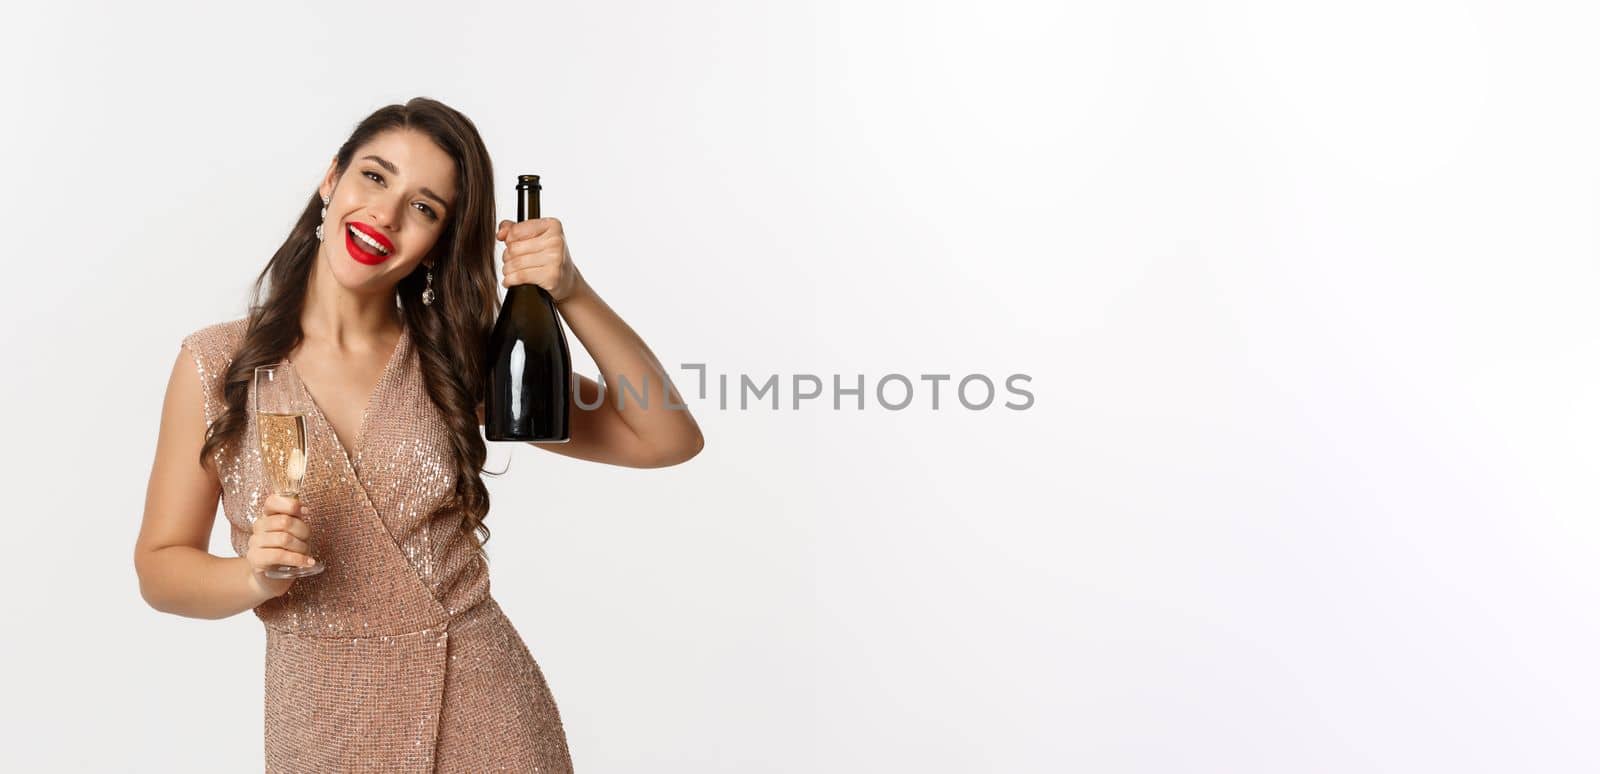 Winter holidays celebration concept. Happy woman on Christmas party saying cheers, raising bottle of champagne and smiling, standing in elegant dress, white background.